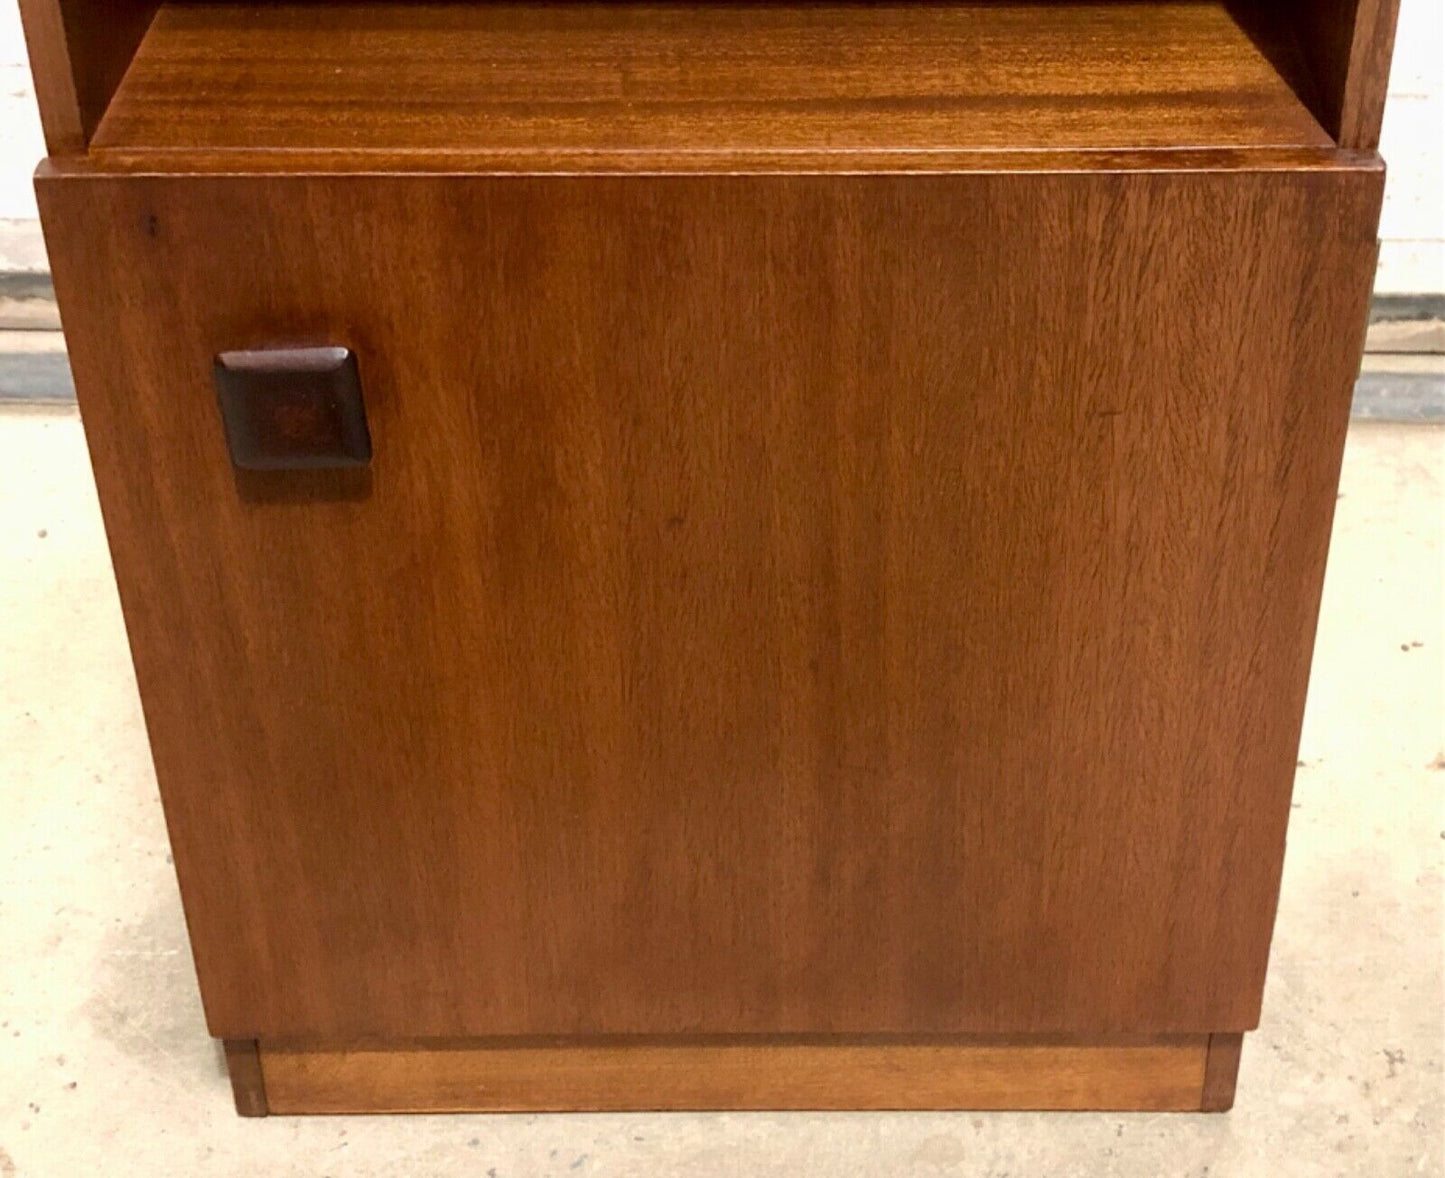 000823....Two Retro Teak Bedside Cabinets By Remploy ( sold )